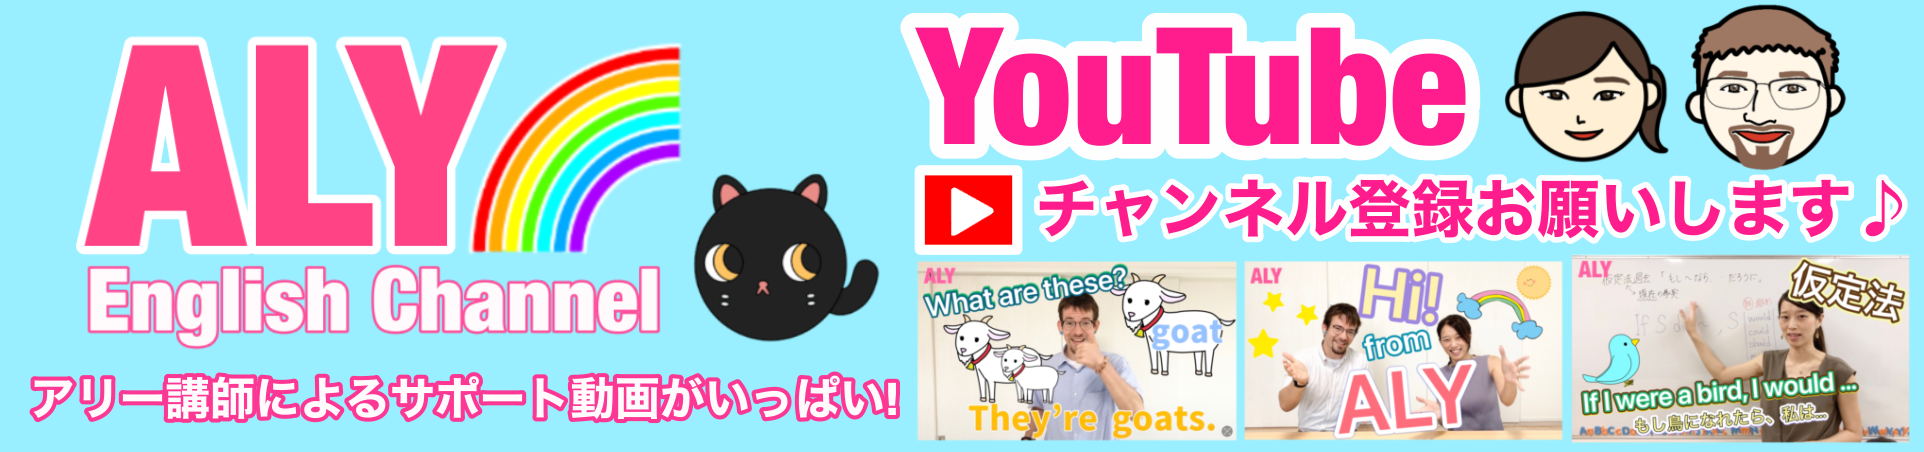 YouTube_channel_banner